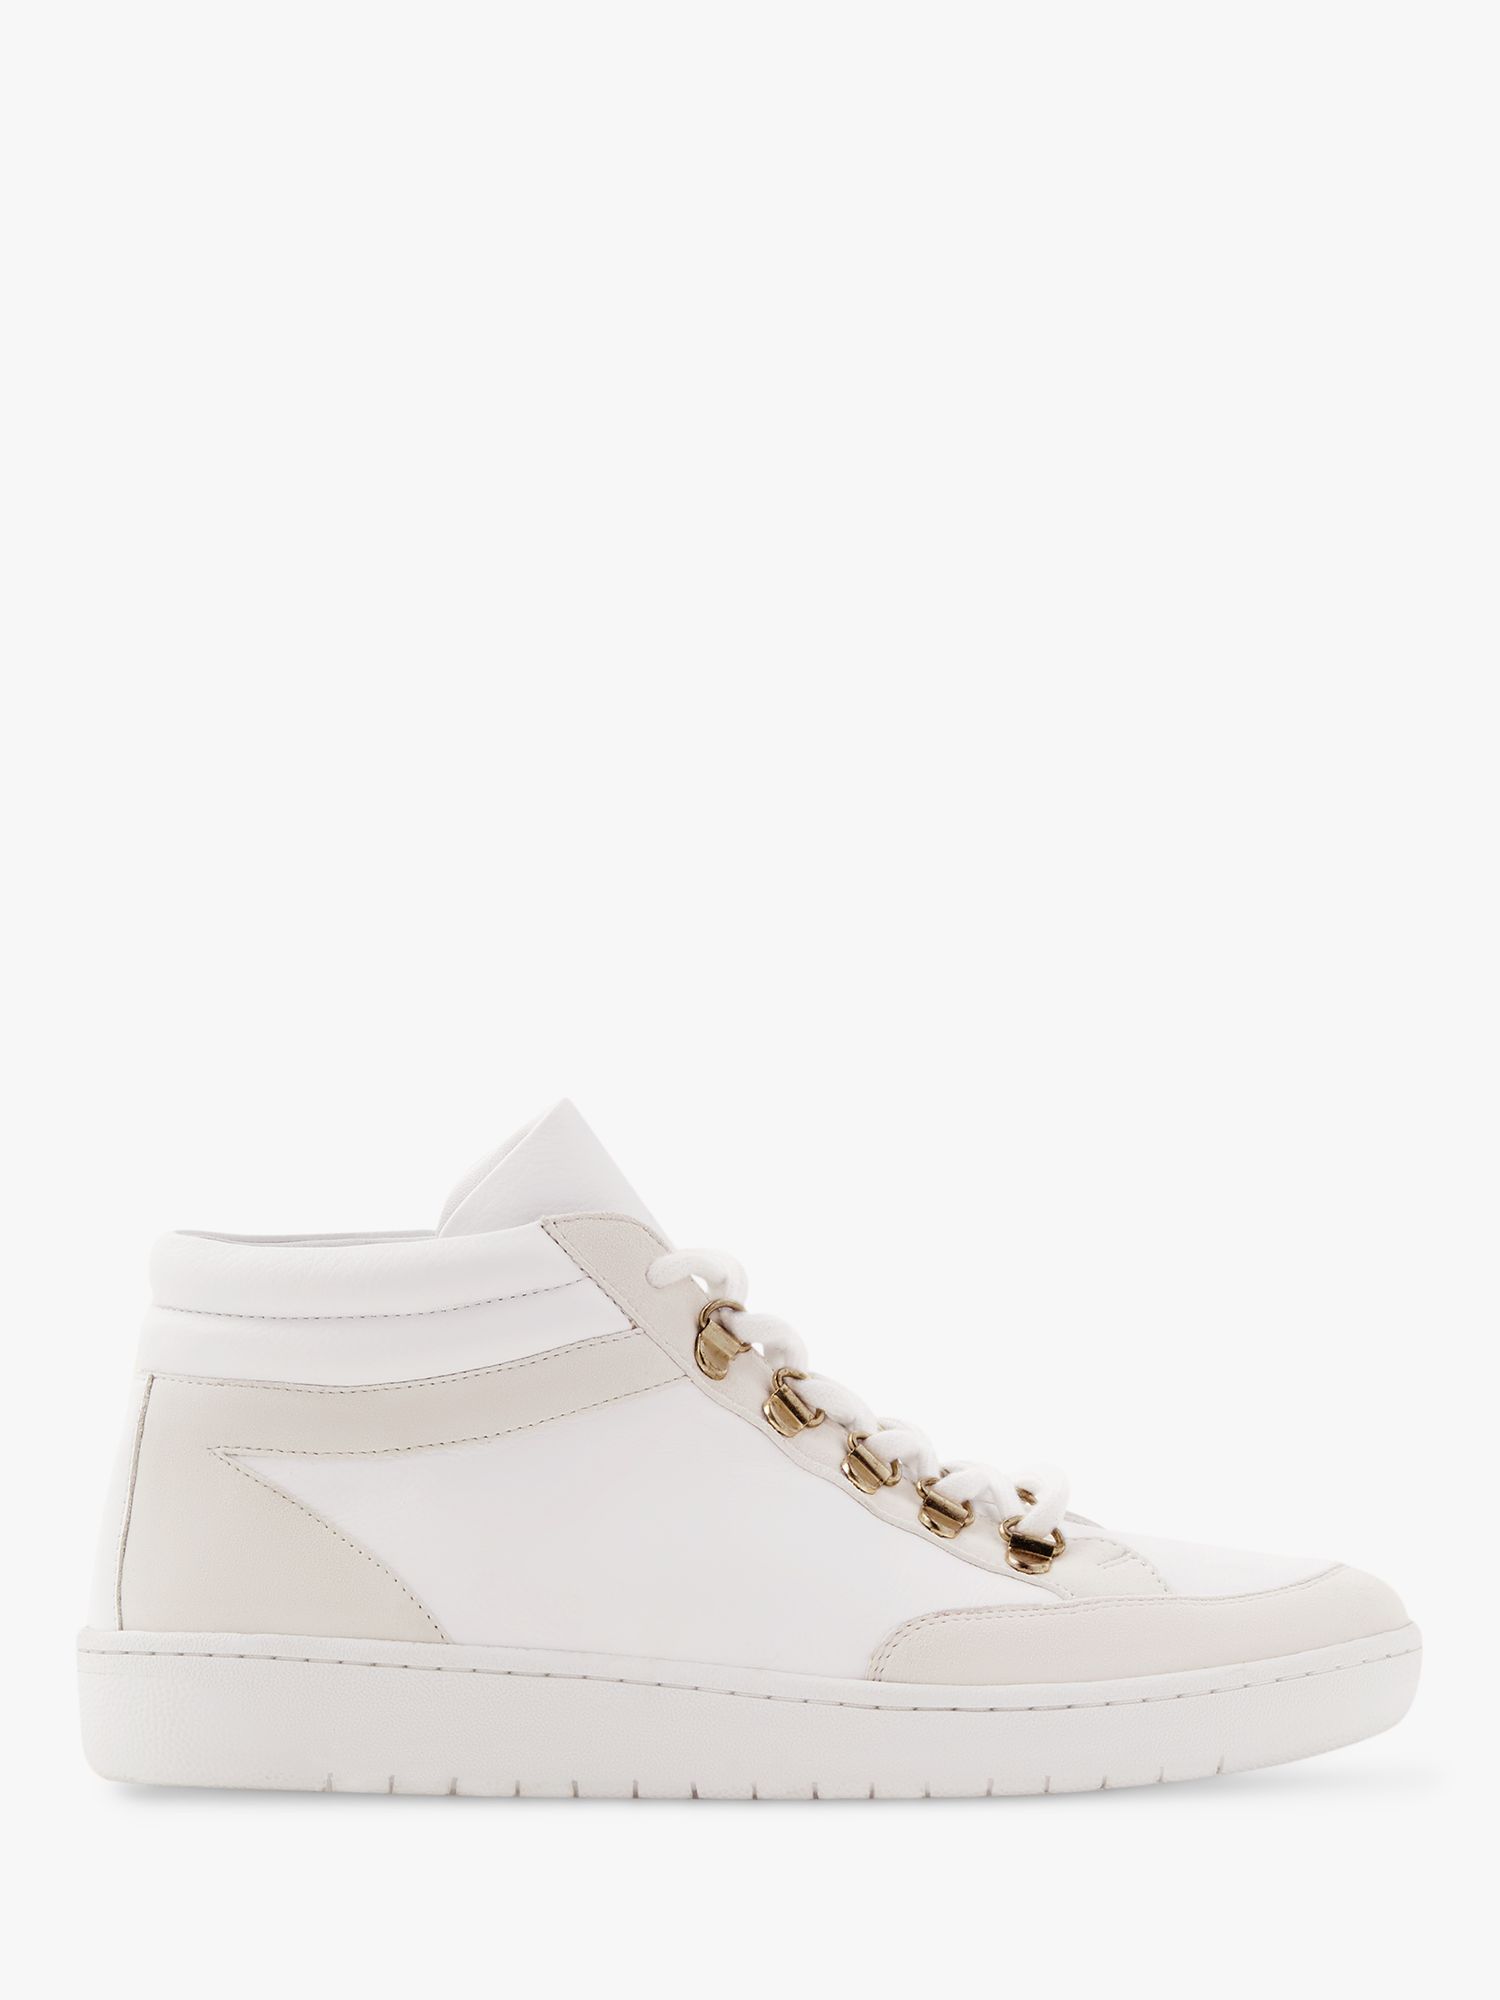 Boden Anita Leather and Suede Trainers, Ecru